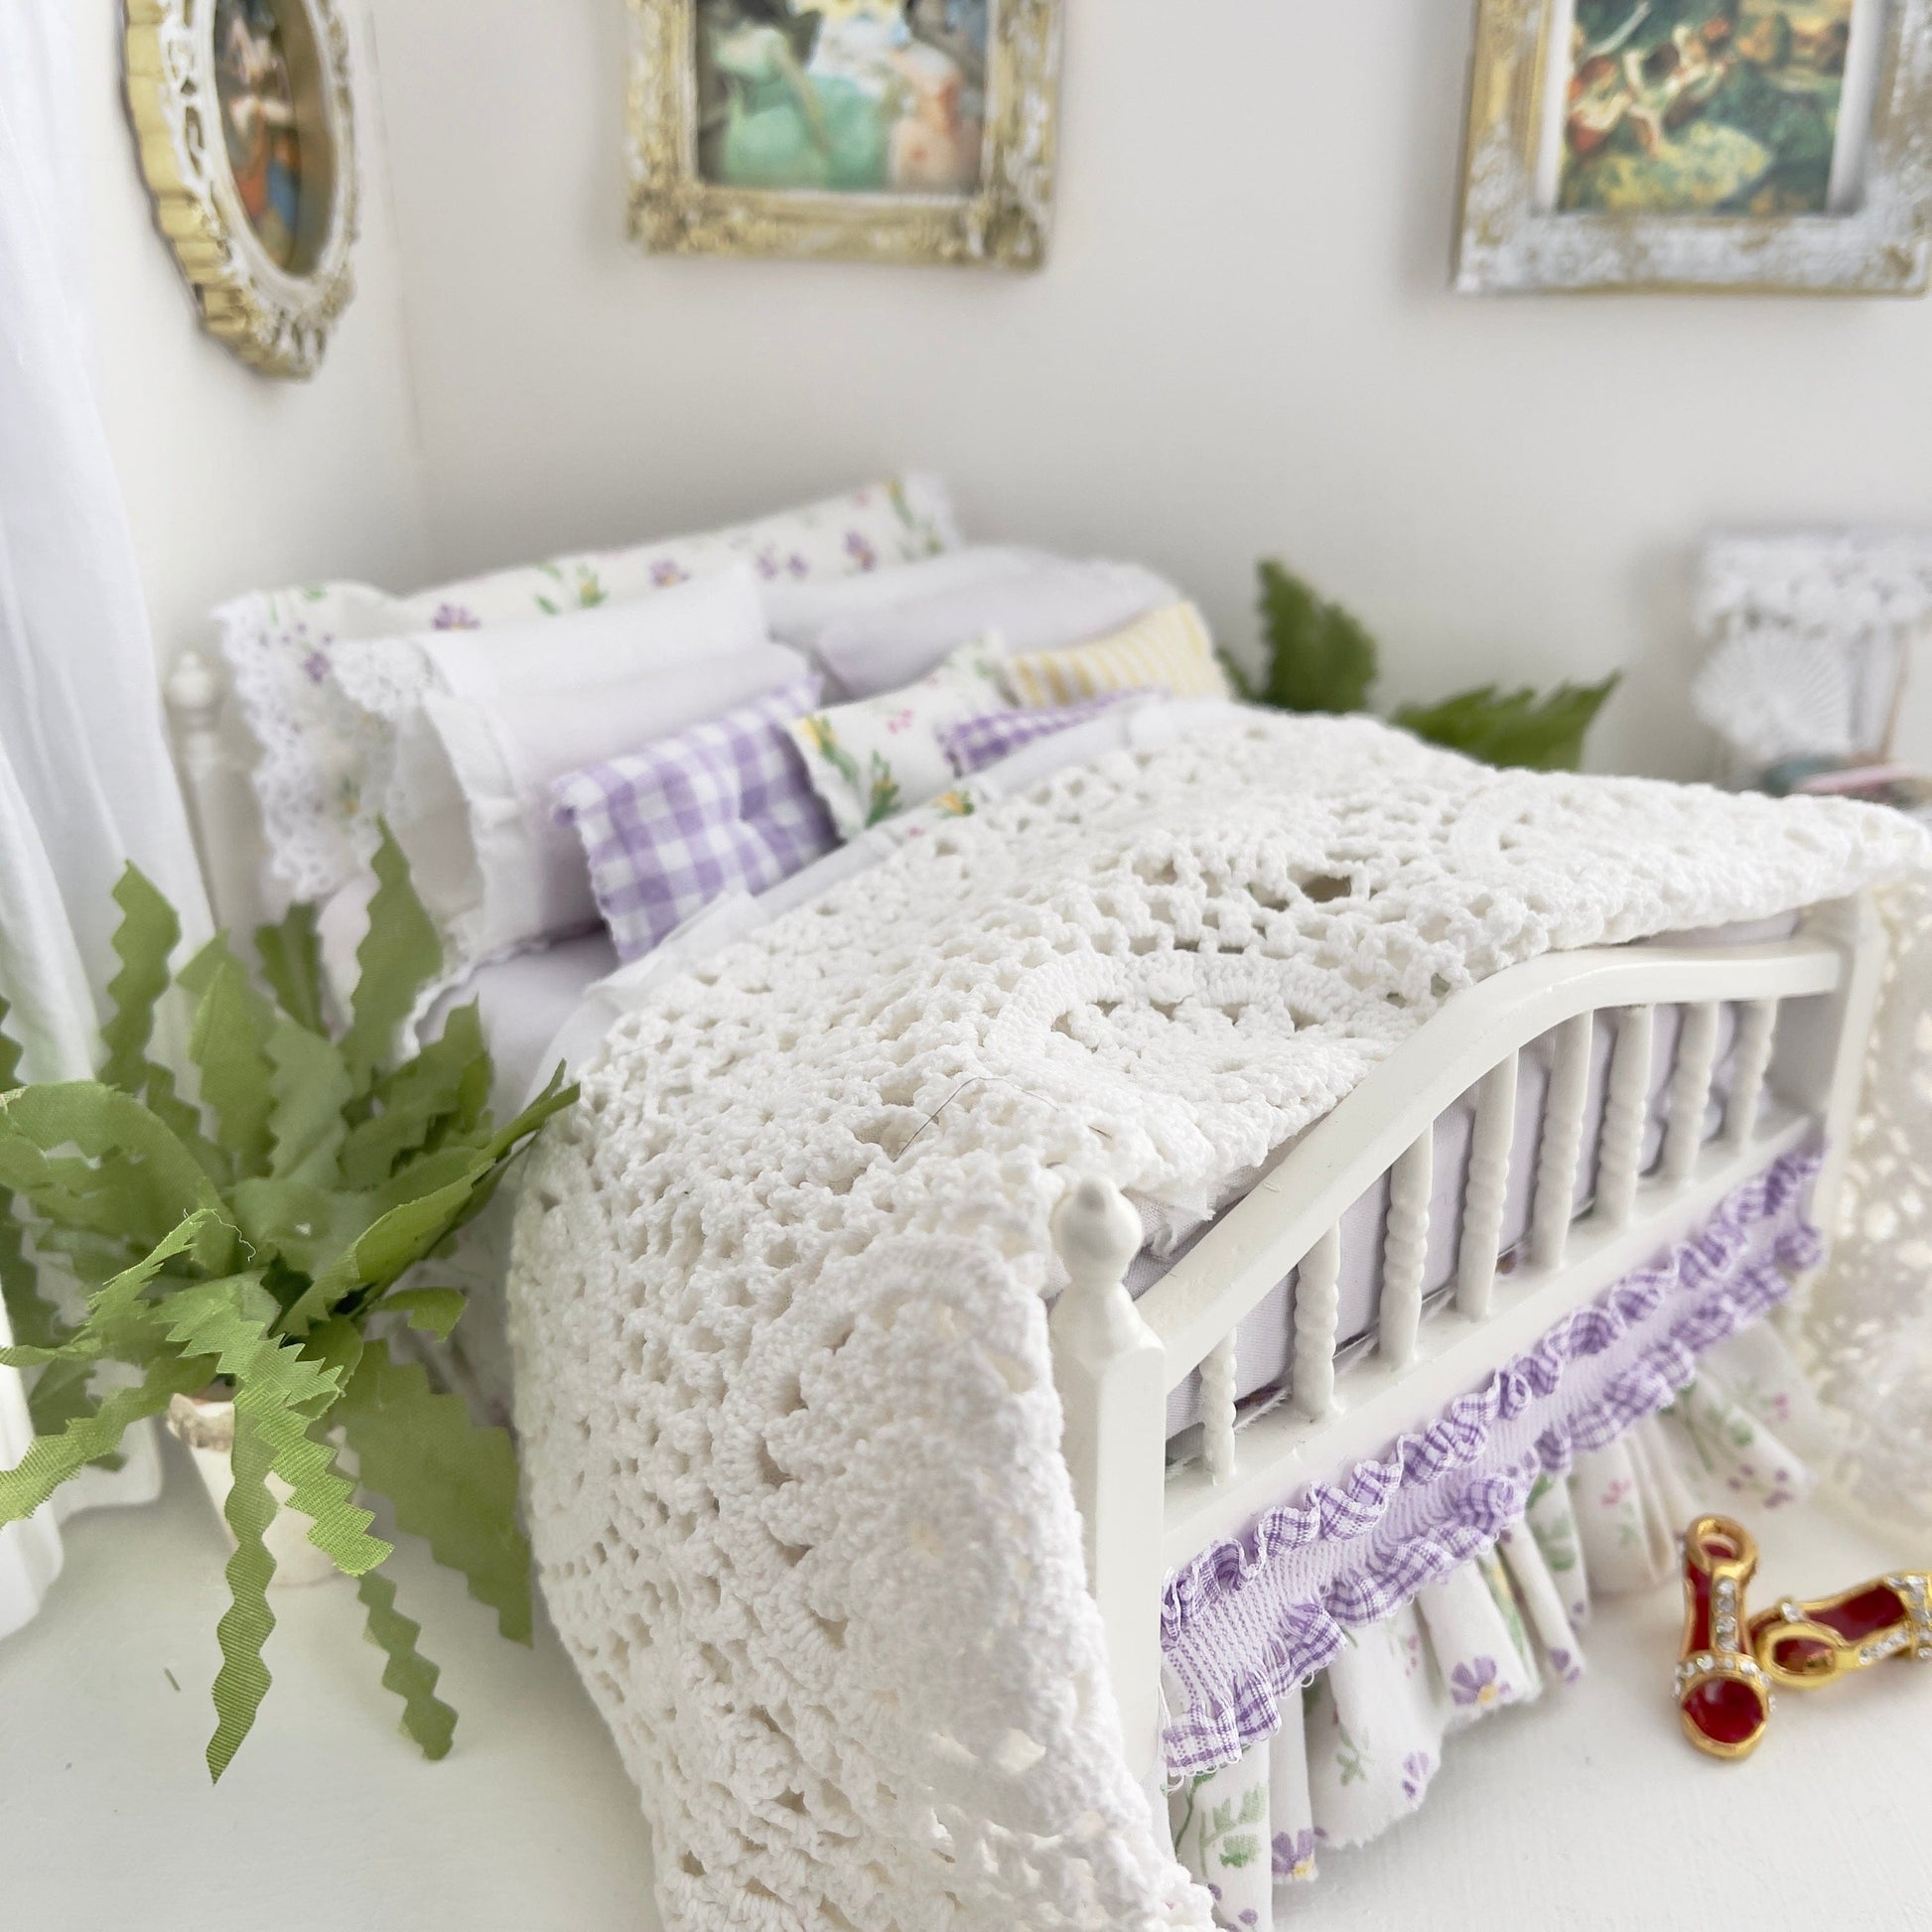 Chantallena Doll House Fix Dressed Bed | White Cotton with Lavender Pink Stripes and Roses, Crochet Knit Throw | Tara